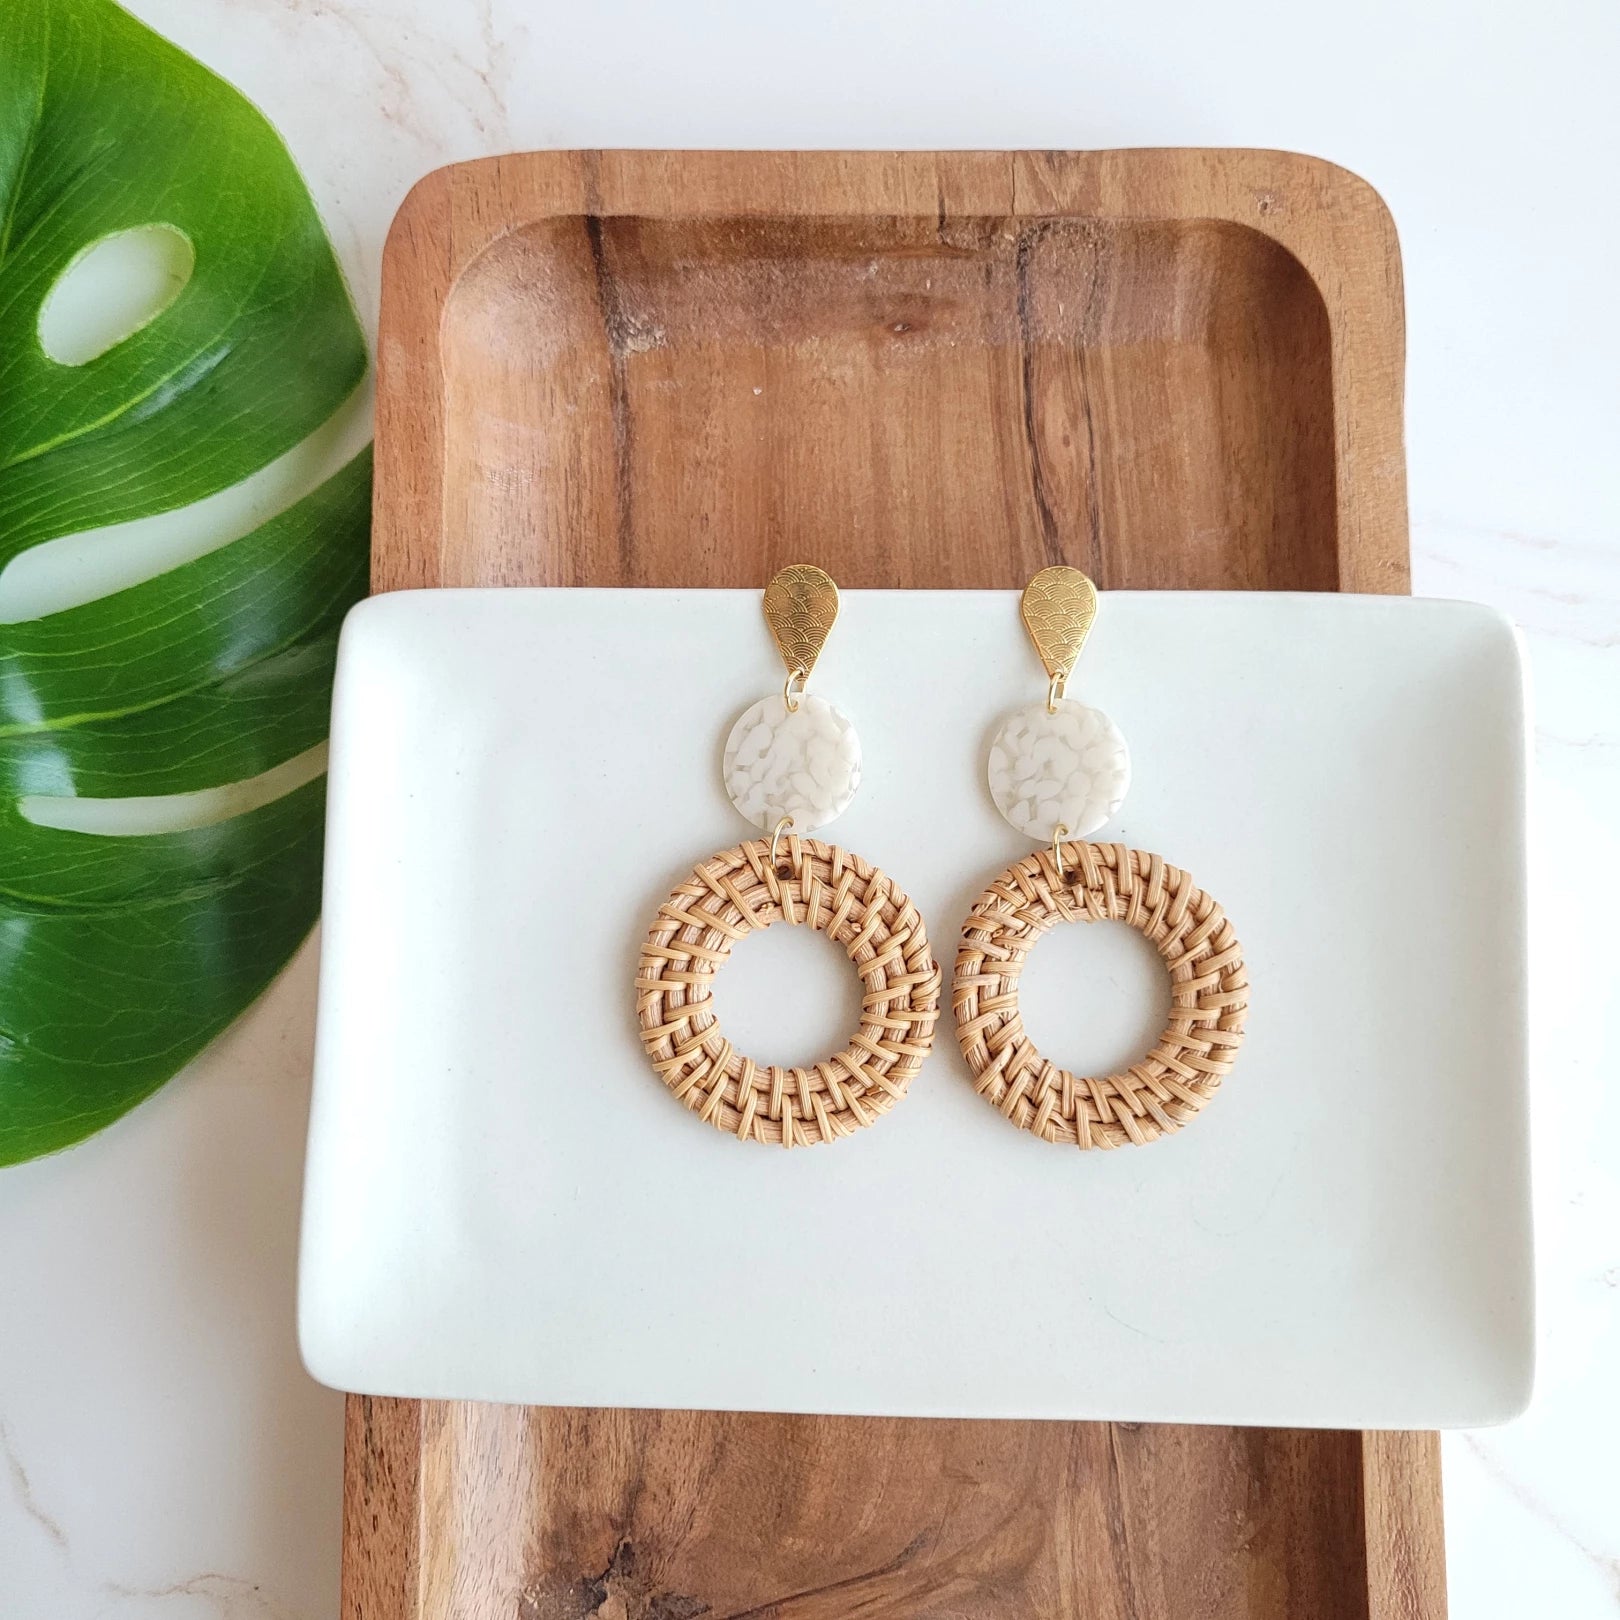  Bring a little bit of resort wear glam to your everyday style with these lightweight, rattan earrings. We've hooked you up with the perfect statement earrings with a trendy twist on our classic rattan look. The gold accents and acrylic only add to their luxurious feel and make them perfect for pairing with any outfit.